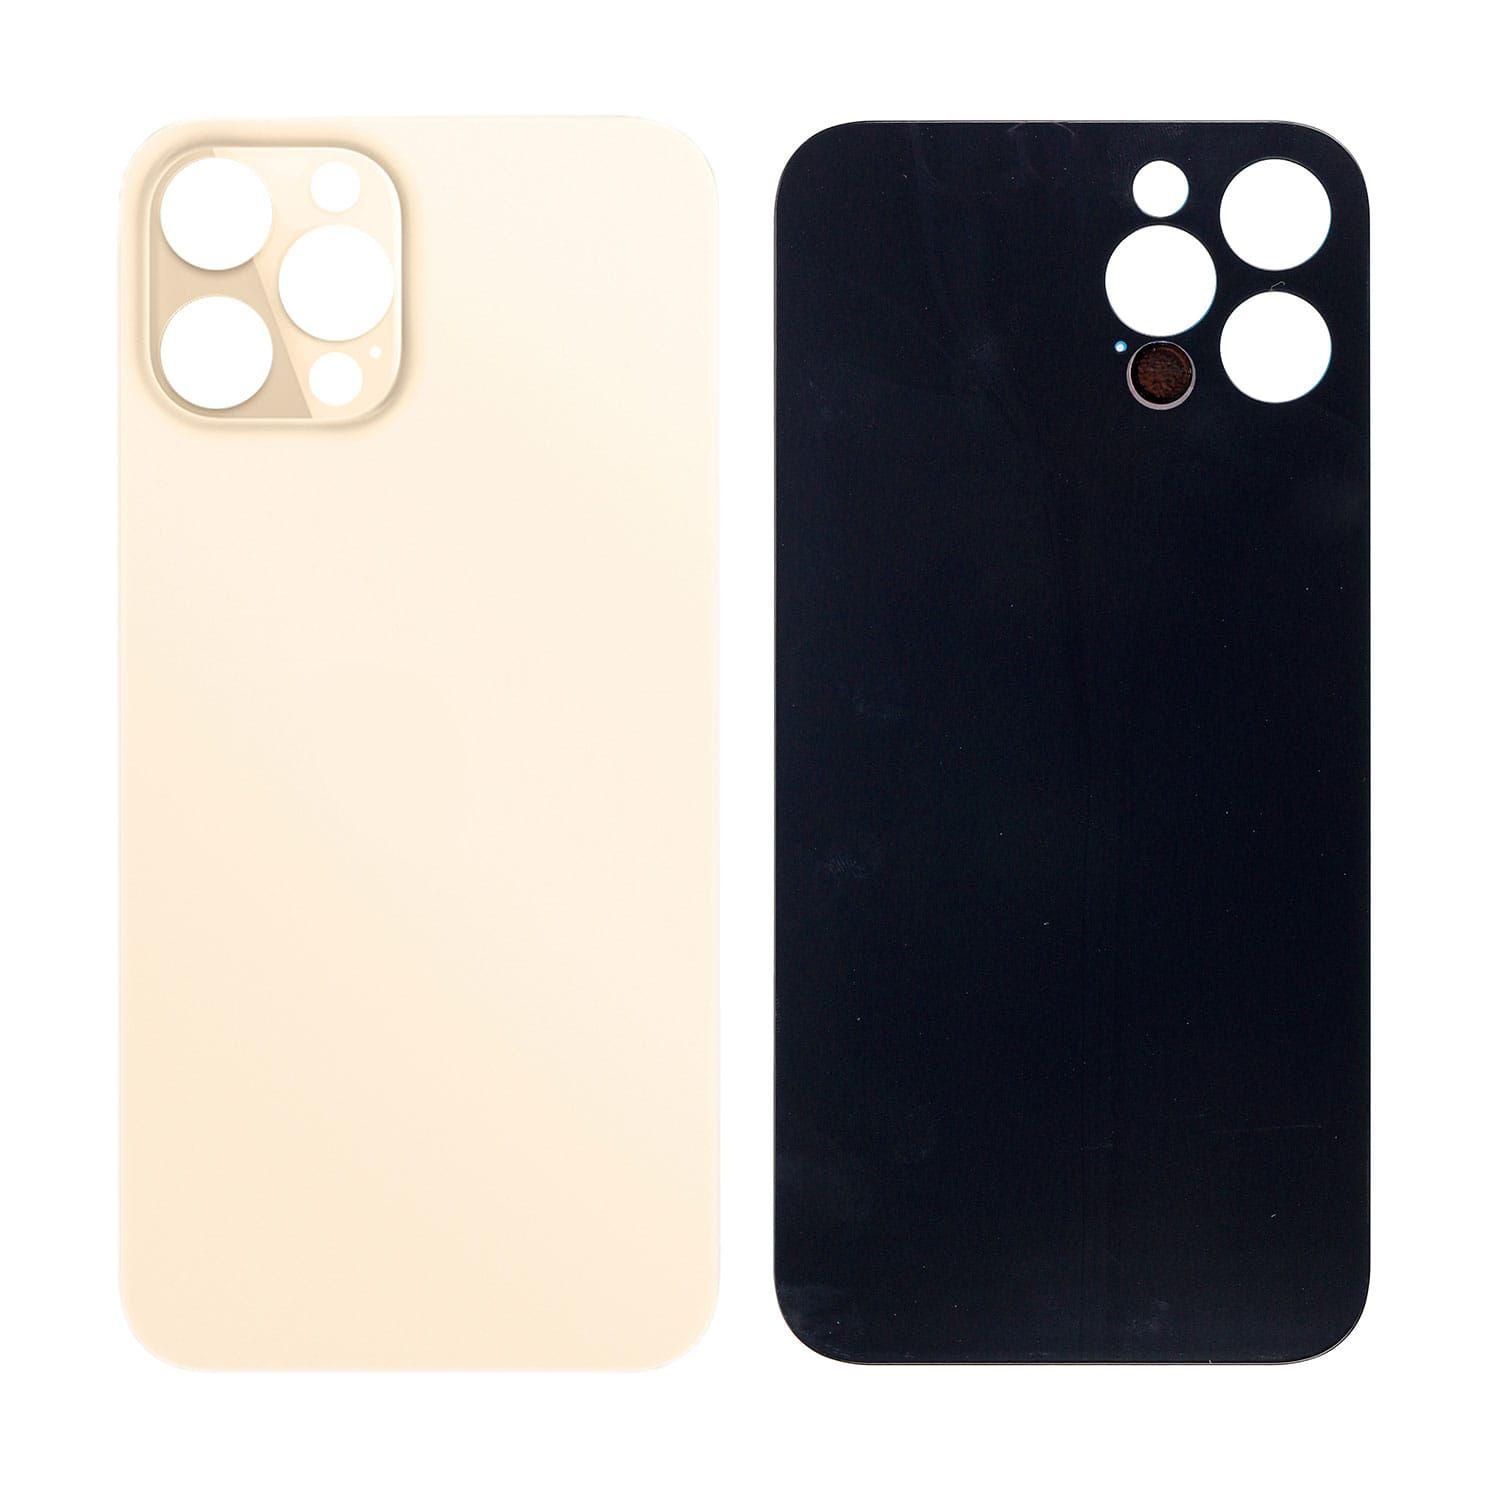 Battery cover iPhone 12 Pro Max with bigger hole for camera glass - gold